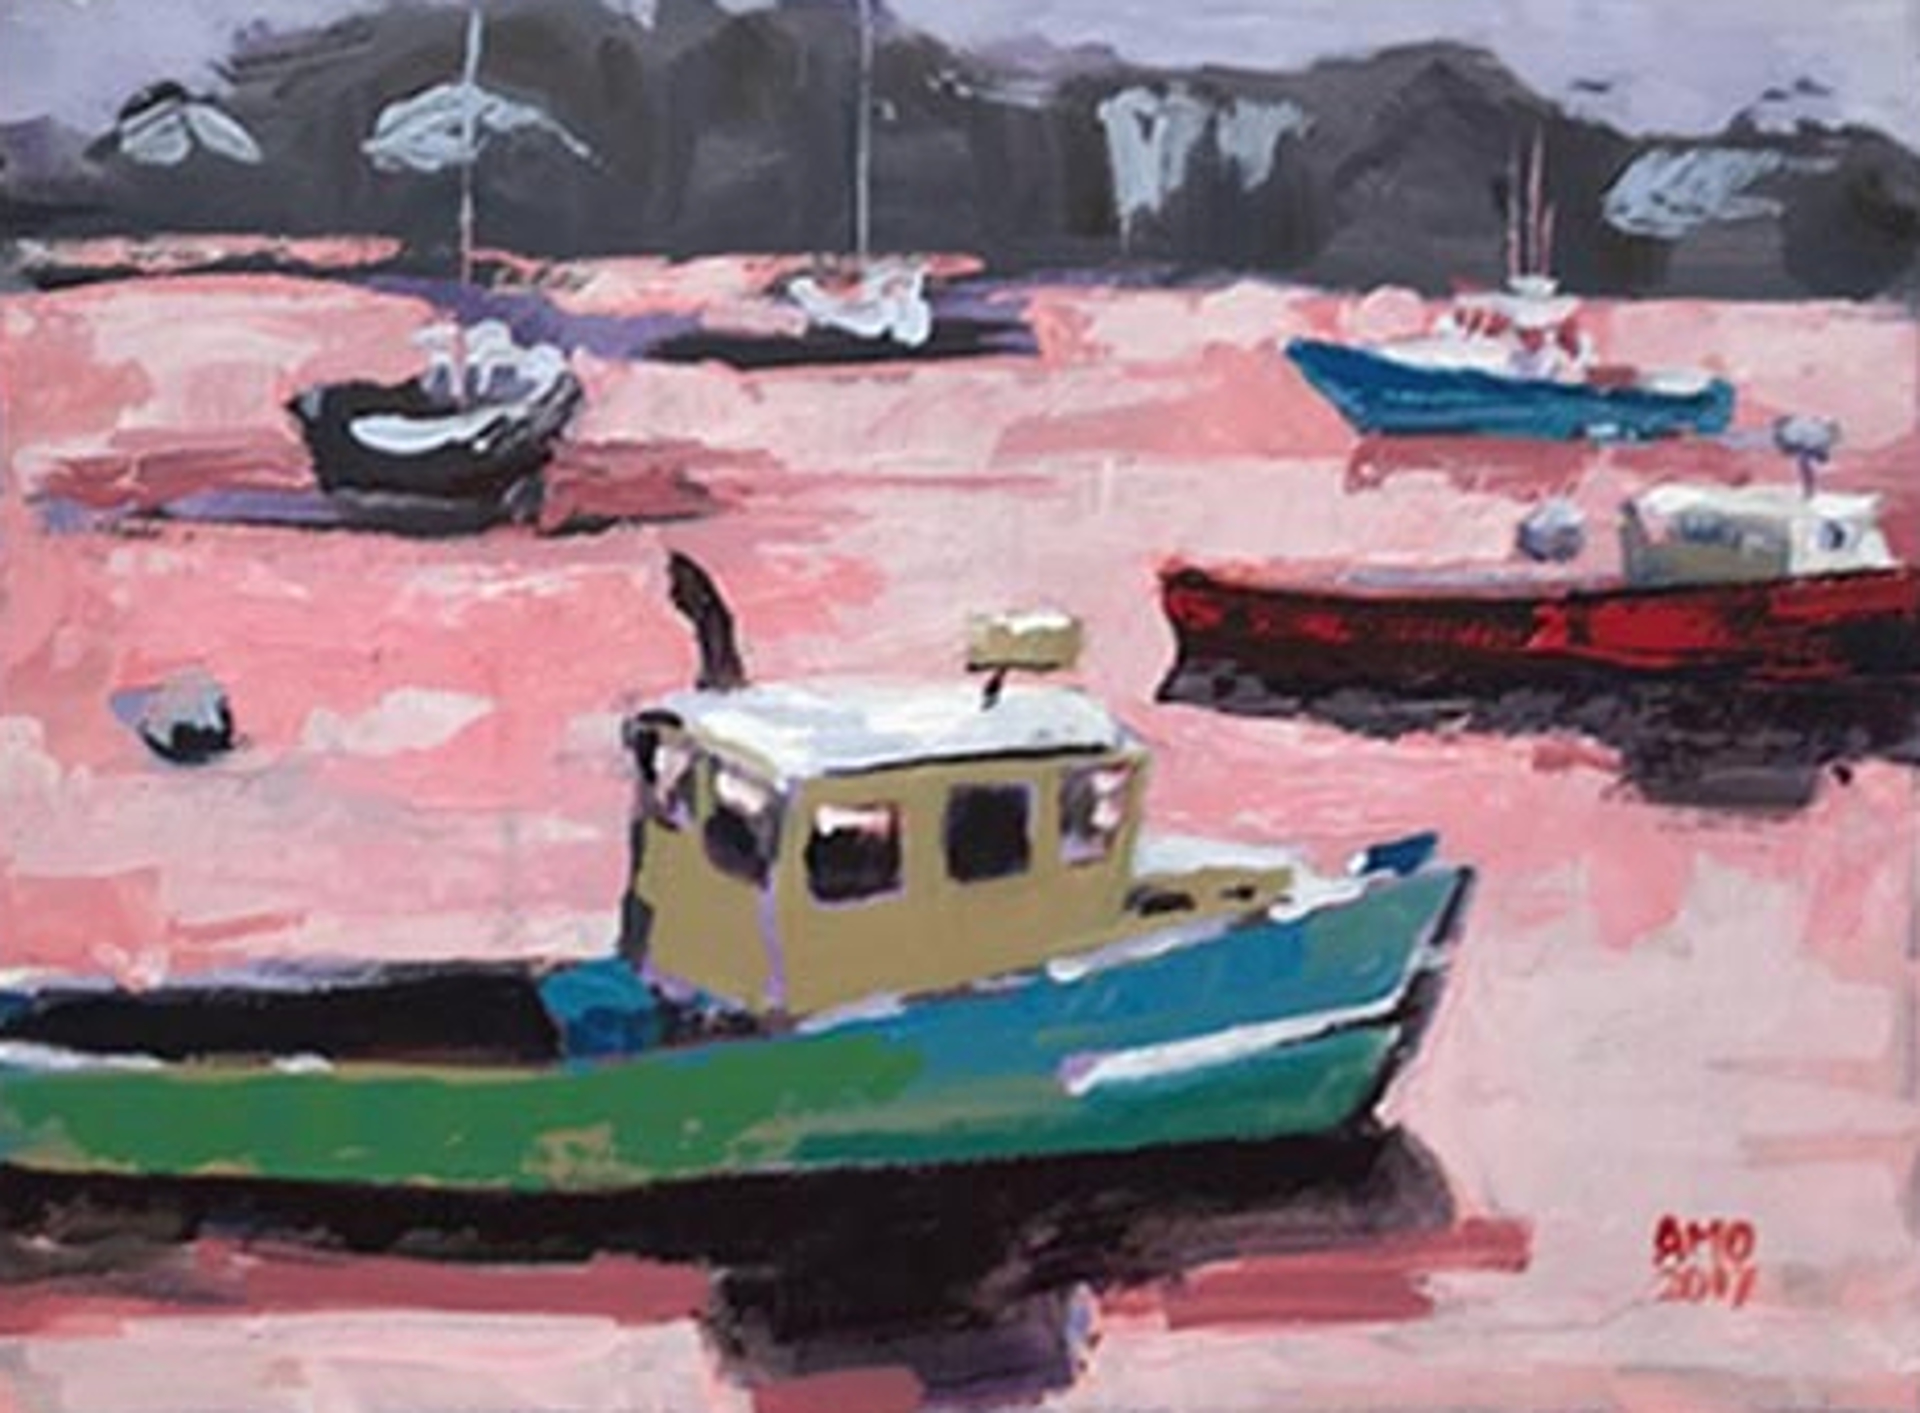 Lobster boats in harbor with pink light by Ann Marie O'Dowd